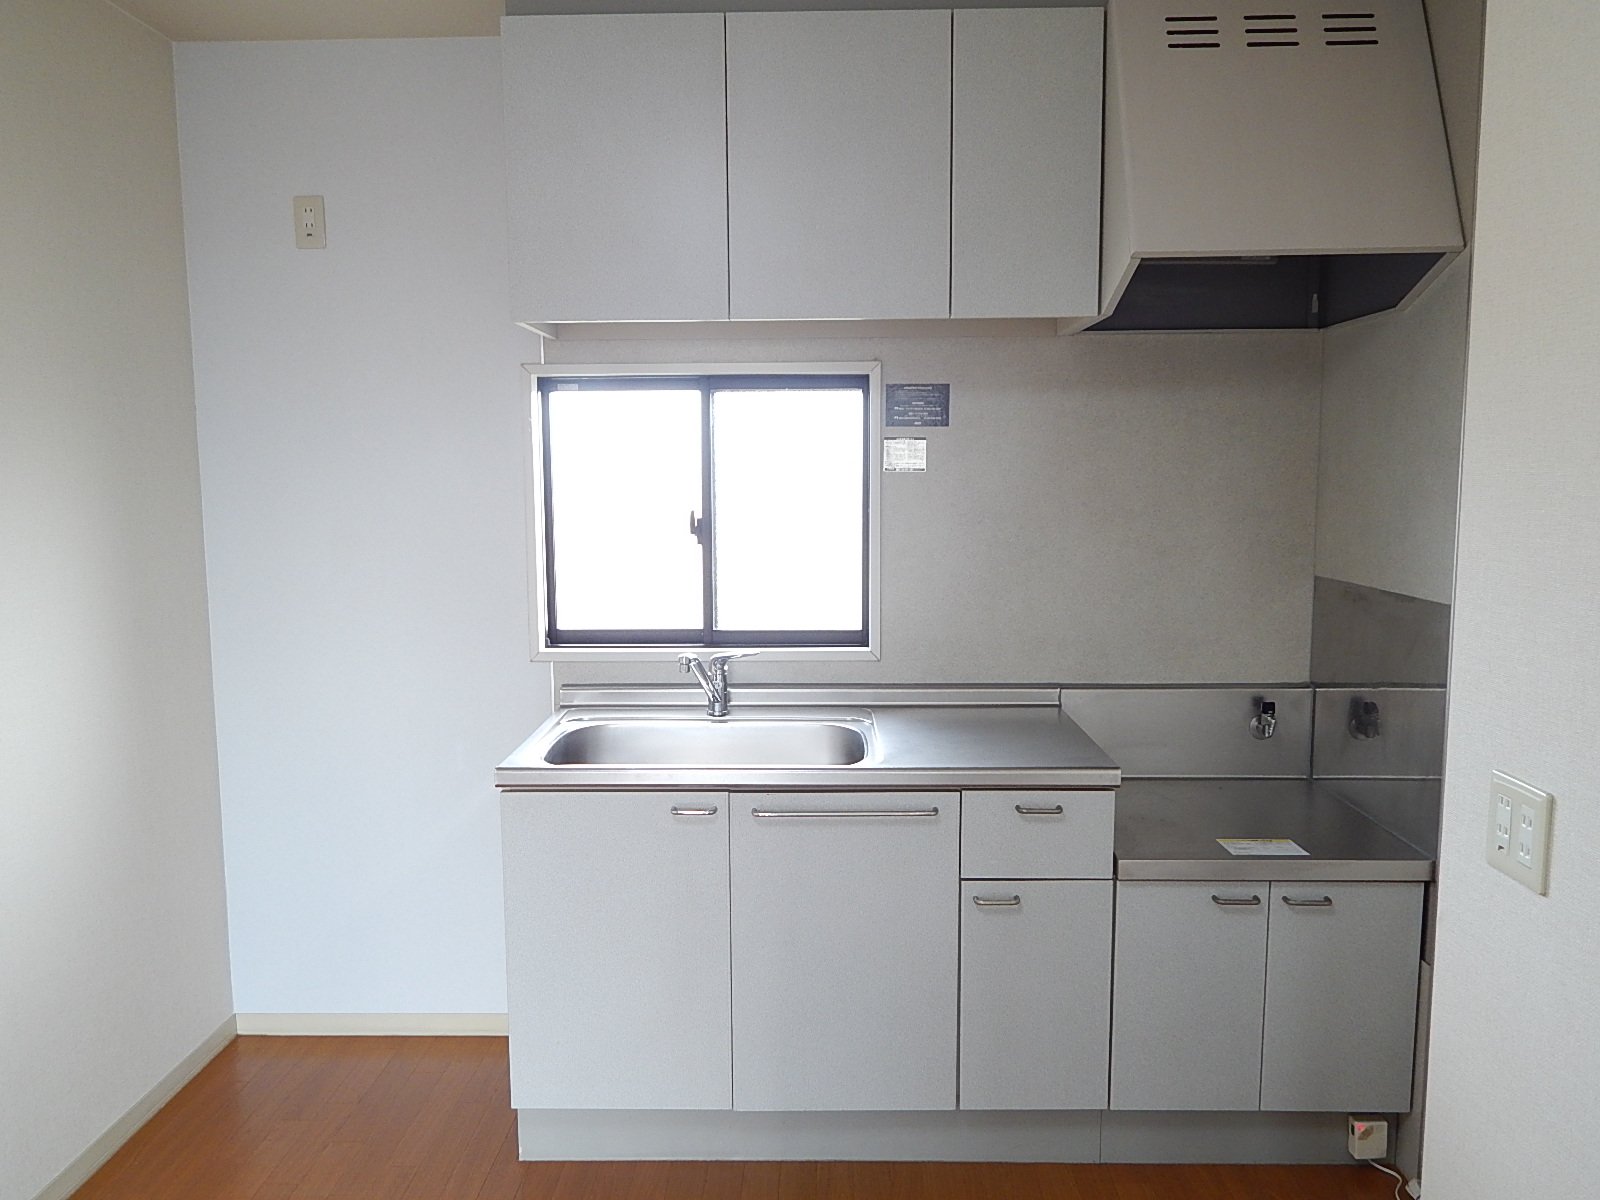 Kitchen. Ventilation also comes with a gas stove installation permitted Window ◎